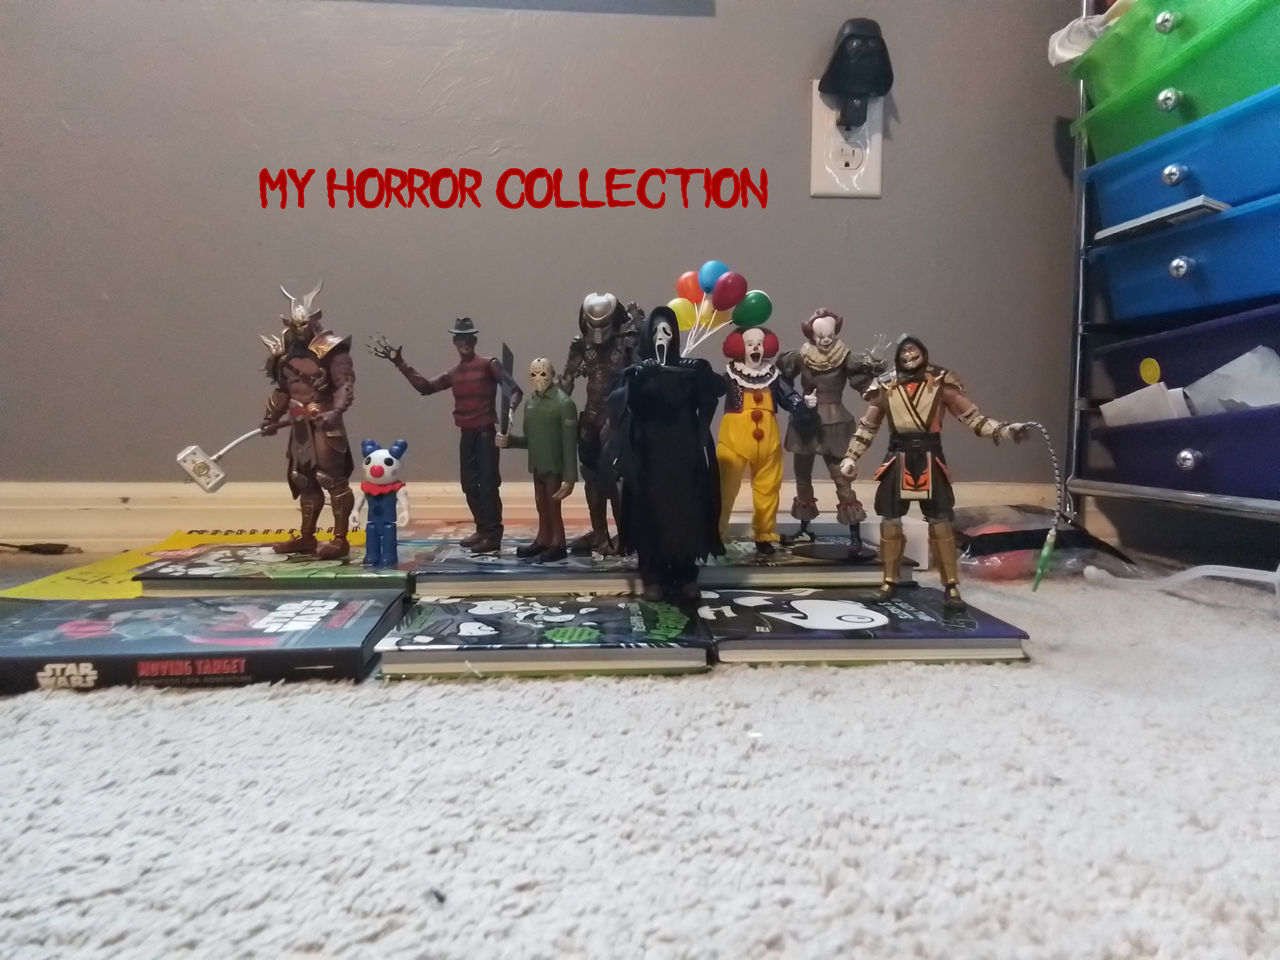 My Neca Horror Collection by PuzzlShield2 on DeviantArt